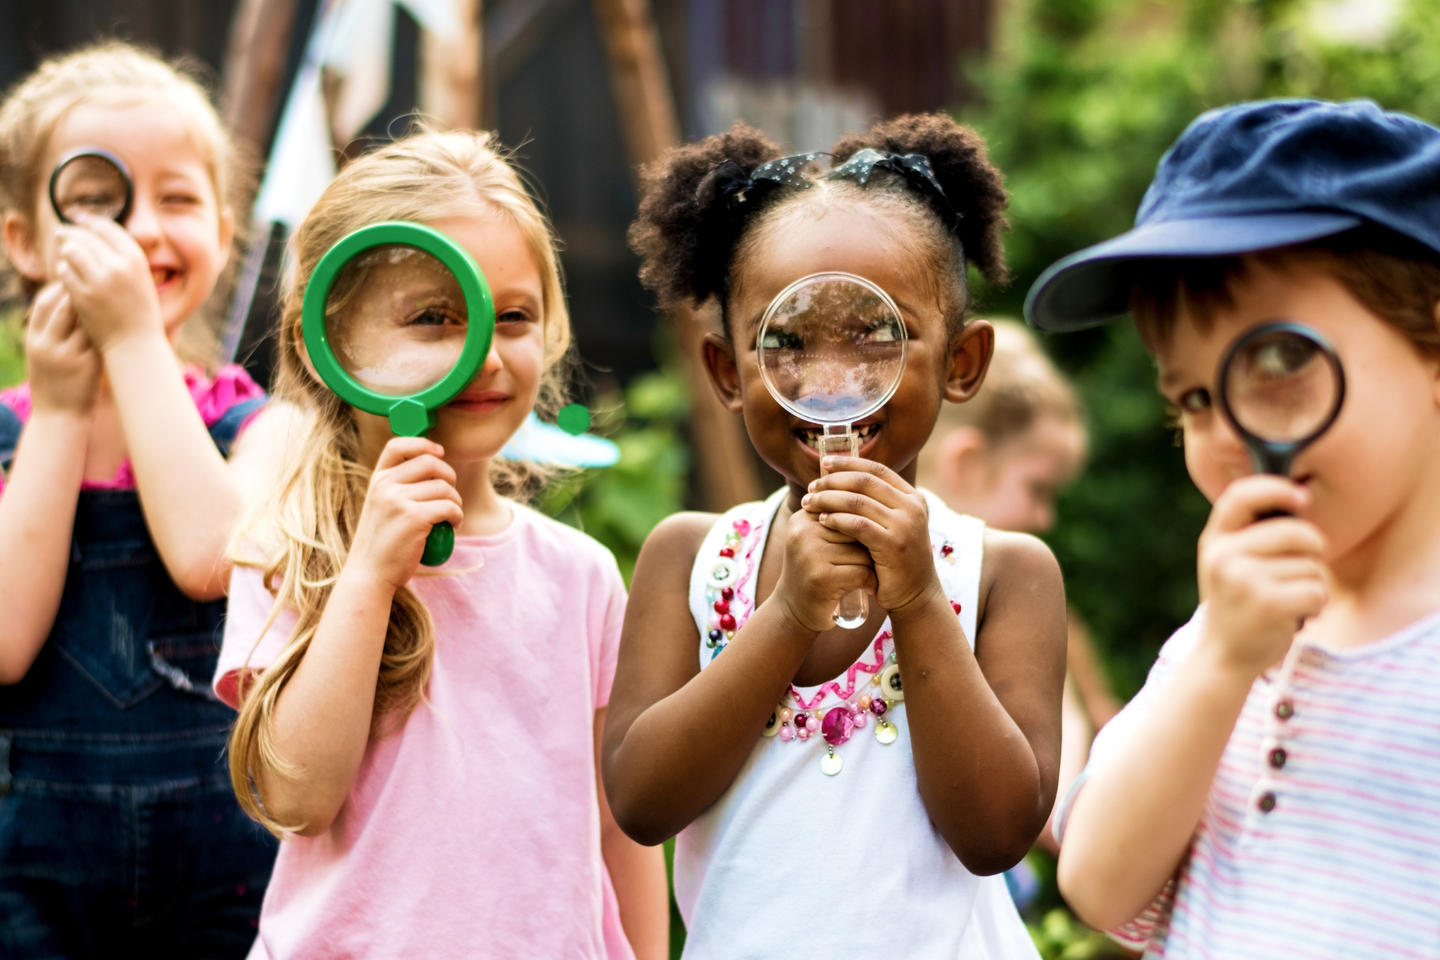 Children looking through magnifying glasses for a photo